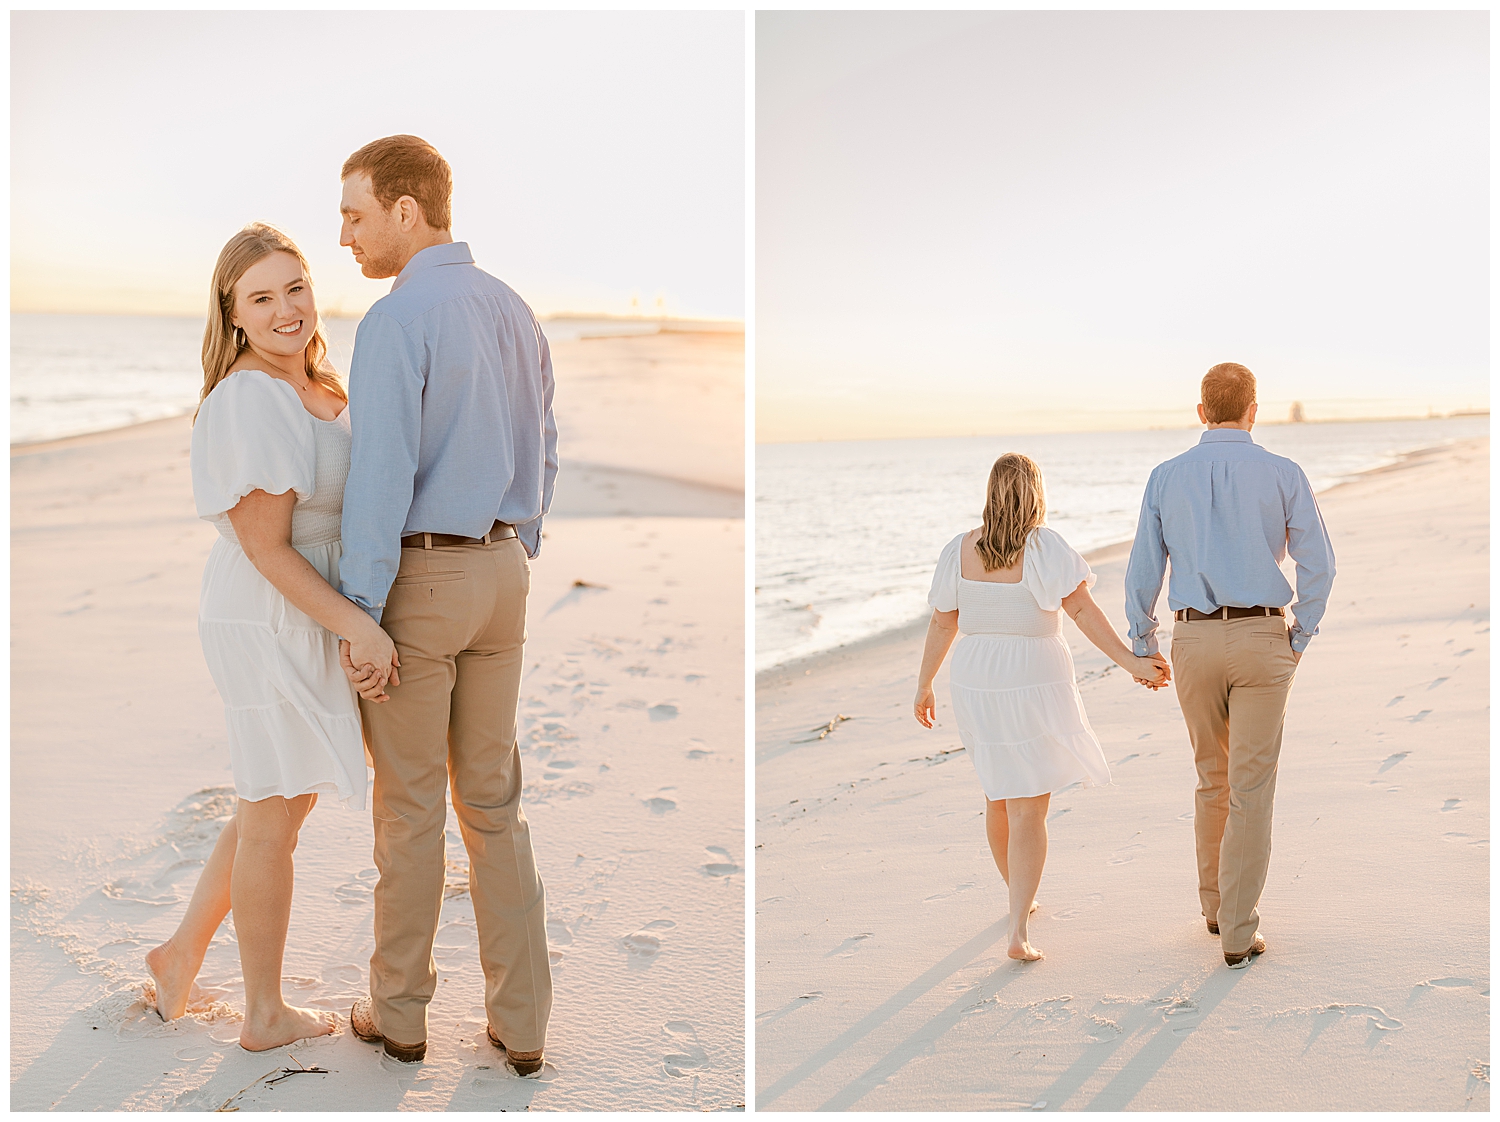 A couple shares a romantic moment on the beach in Gulfport.